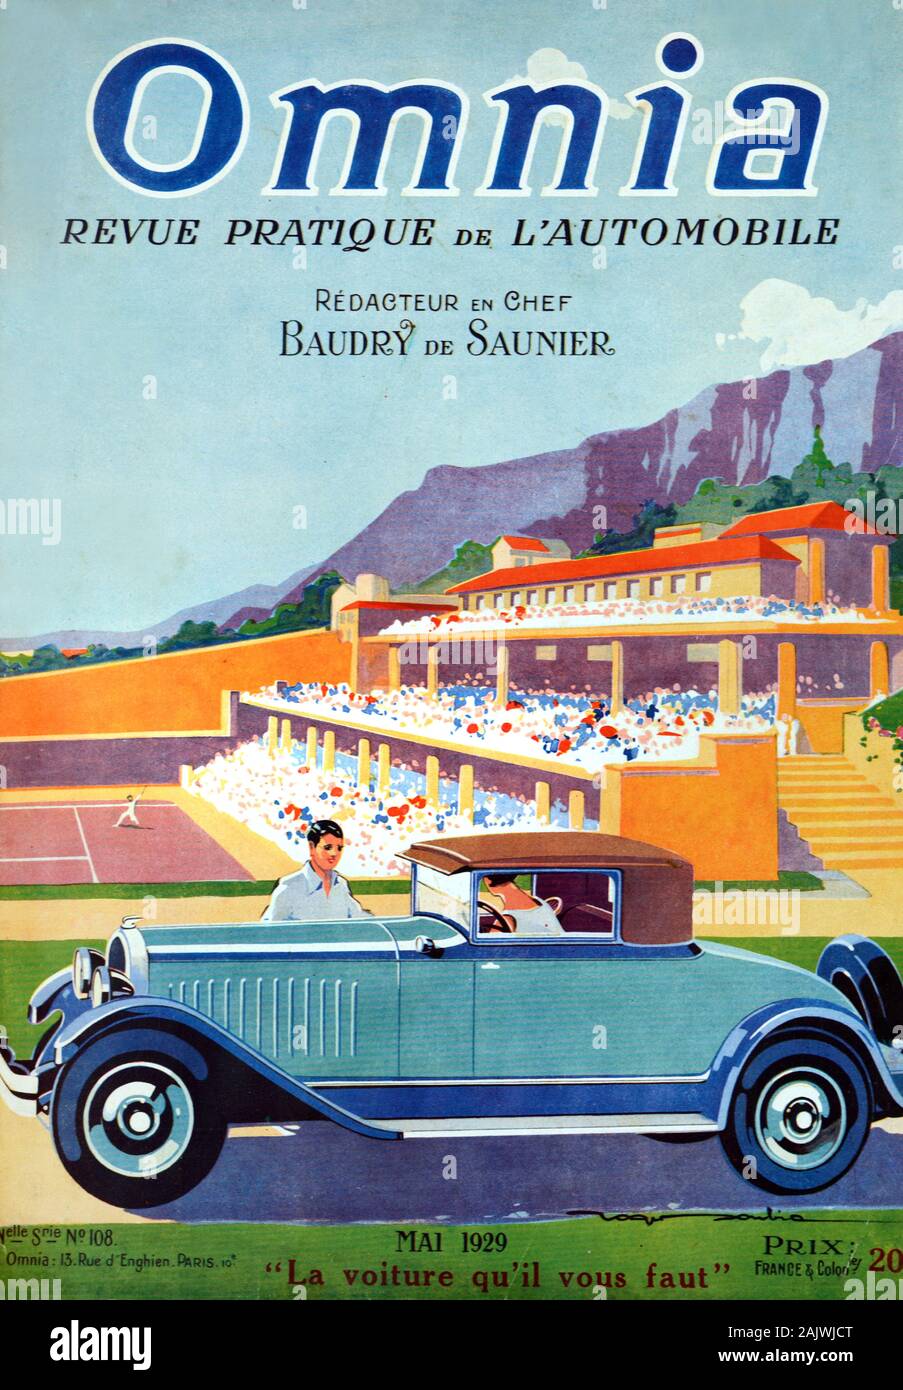 Vintage Car Citroën Type C4 (1928) Coupé or Coupe in front of the Monte Carlo Country Club and Tennis Courts, founded in 1928. Front Cover of Early French Motoring Magazine Omnia May 1929. Stock Photo